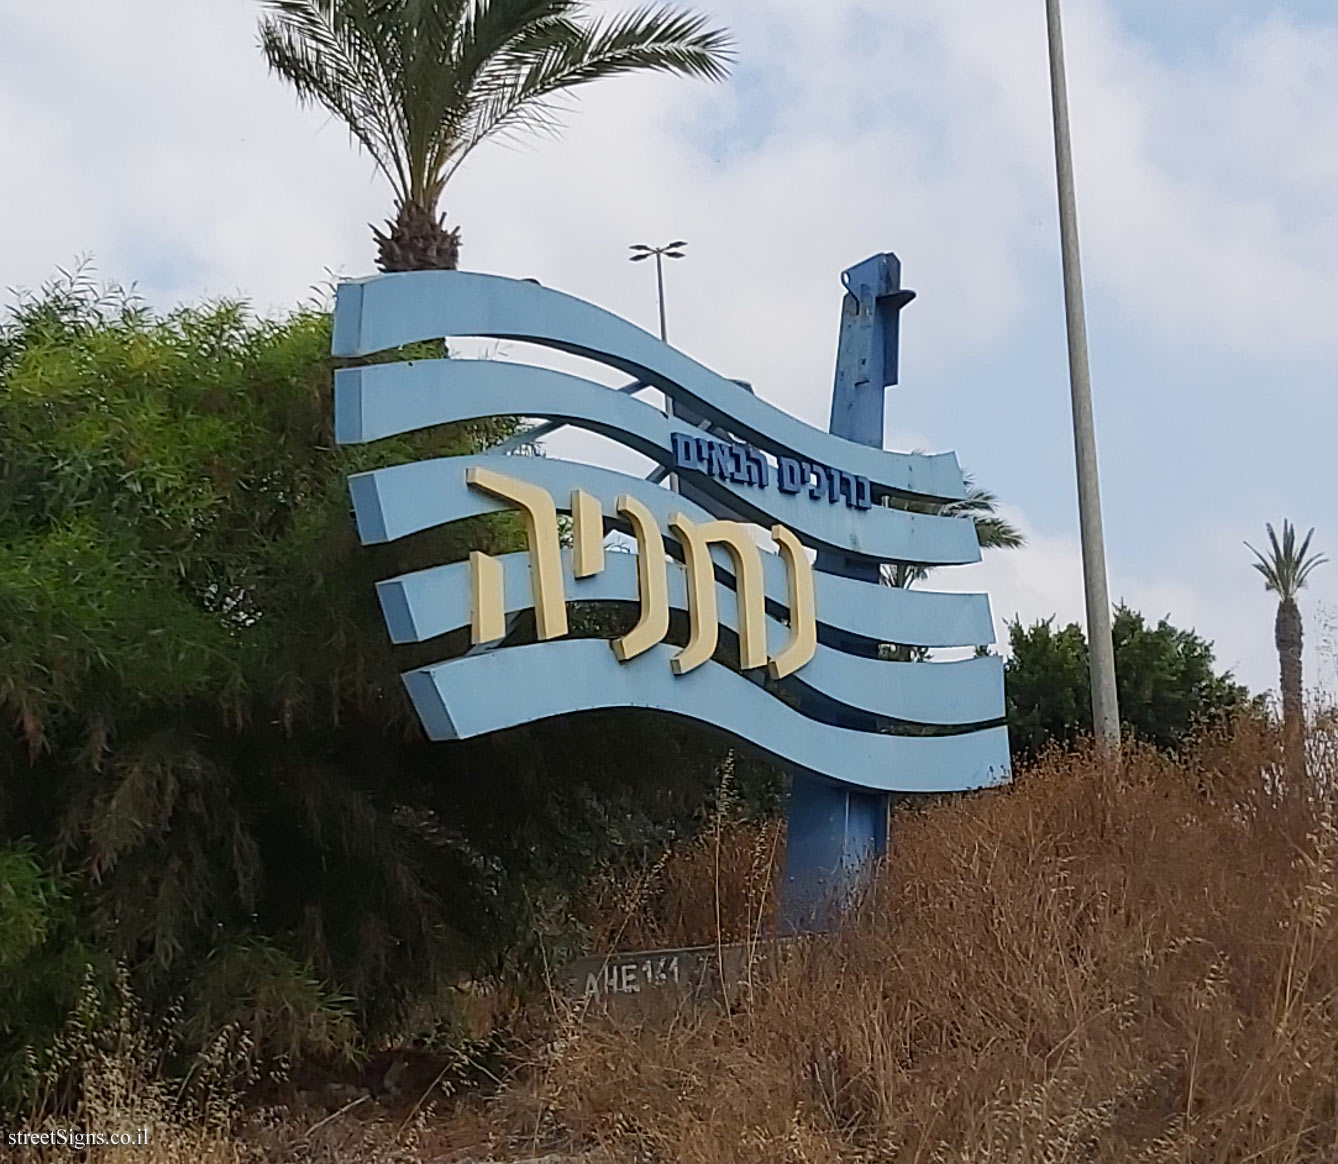 Netanya - the entrance sign to the city